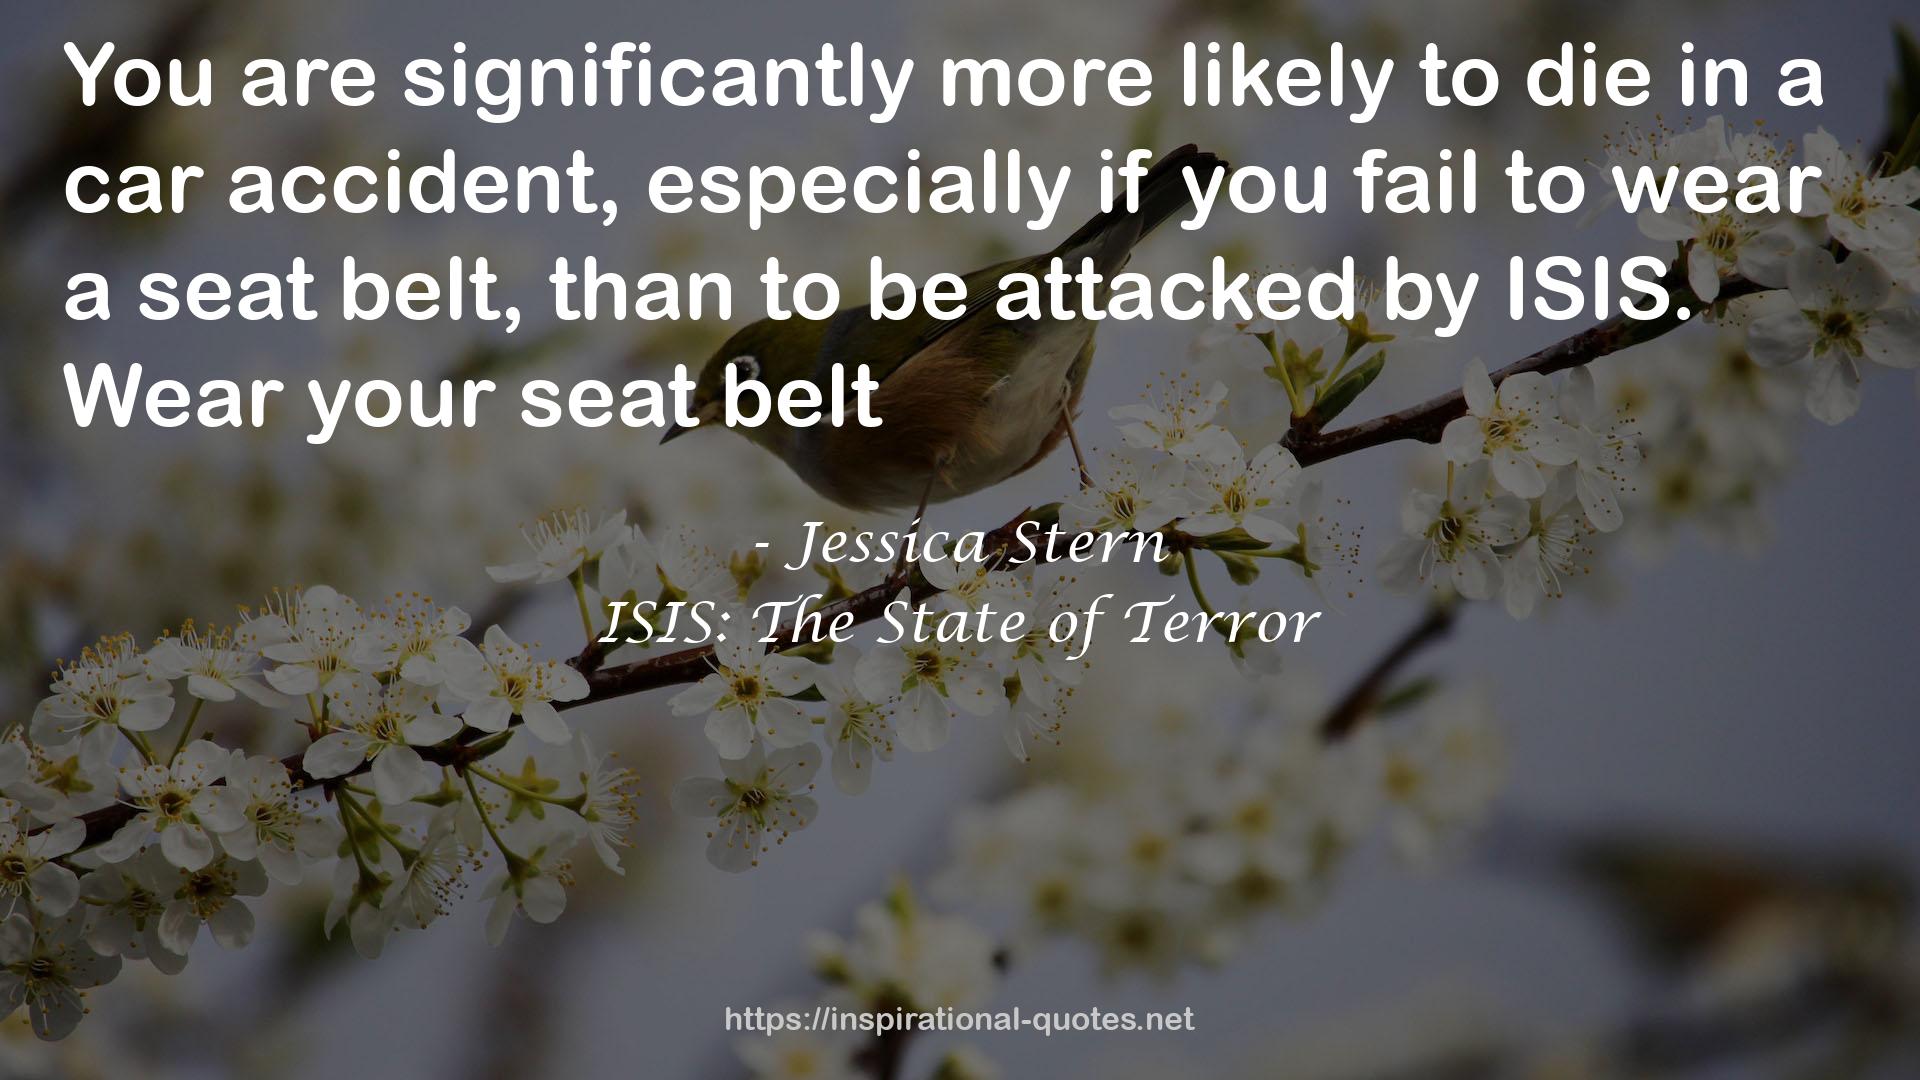 ISIS: The State of Terror QUOTES